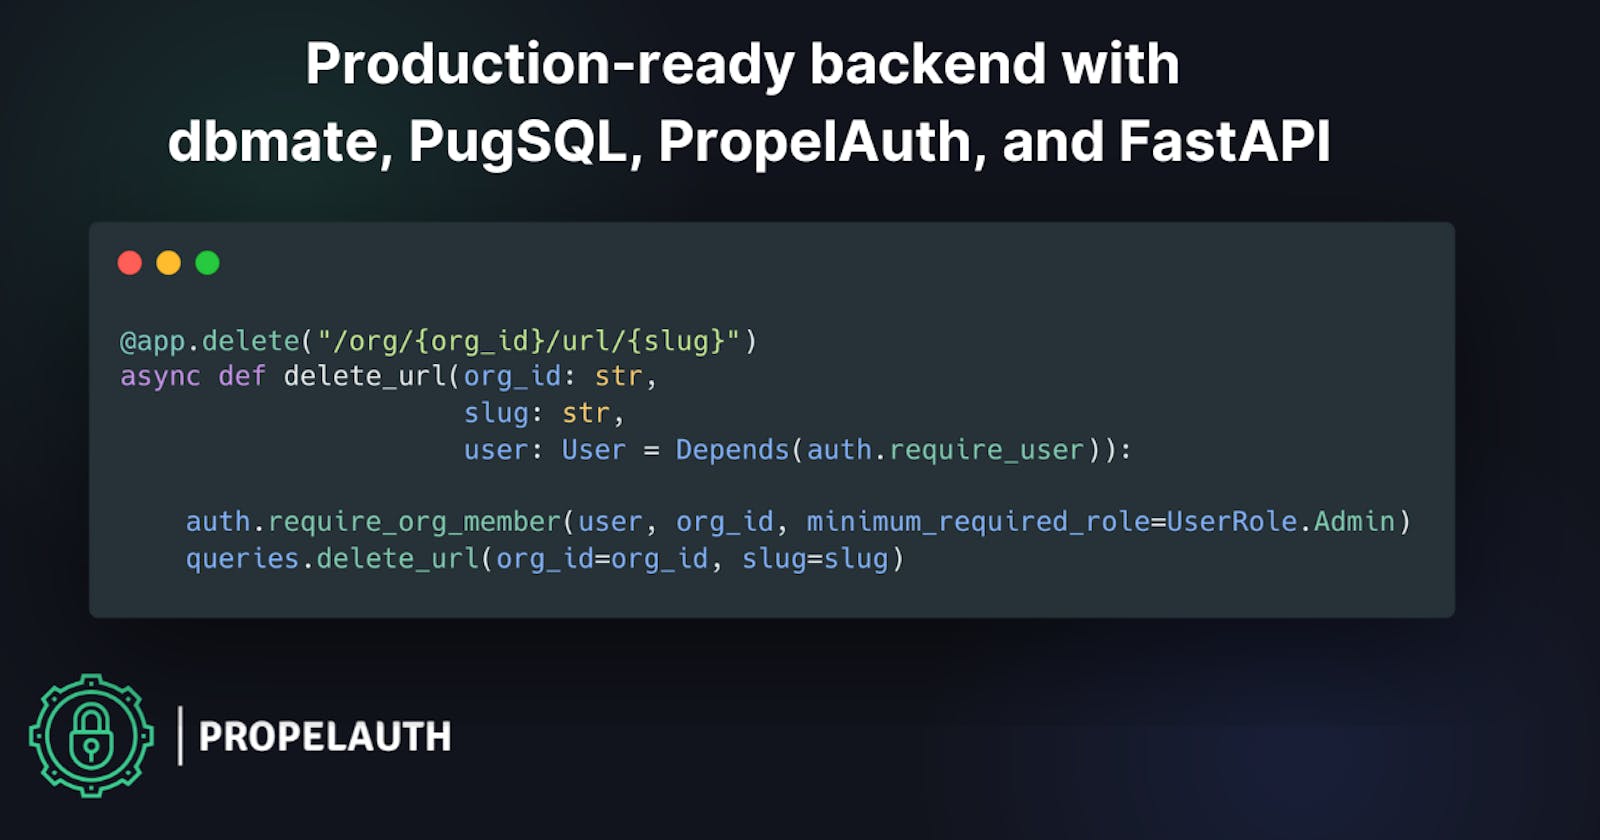 Production-ready backend with dbmate, PugSQL, PropelAuth, and FastAPI